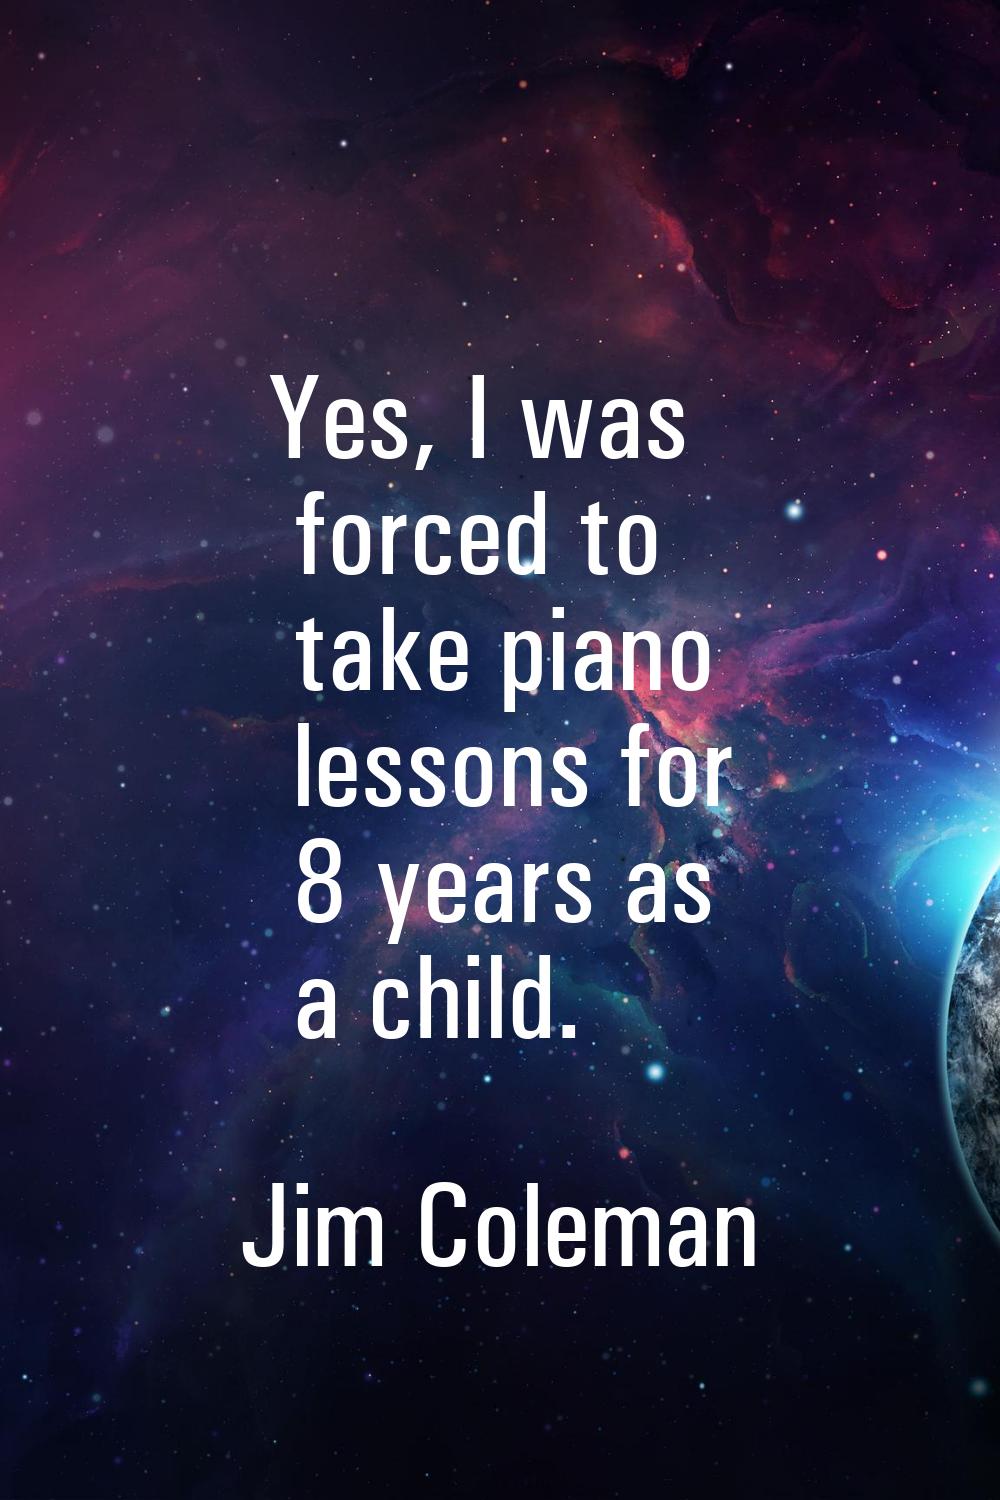 Yes, I was forced to take piano lessons for 8 years as a child.